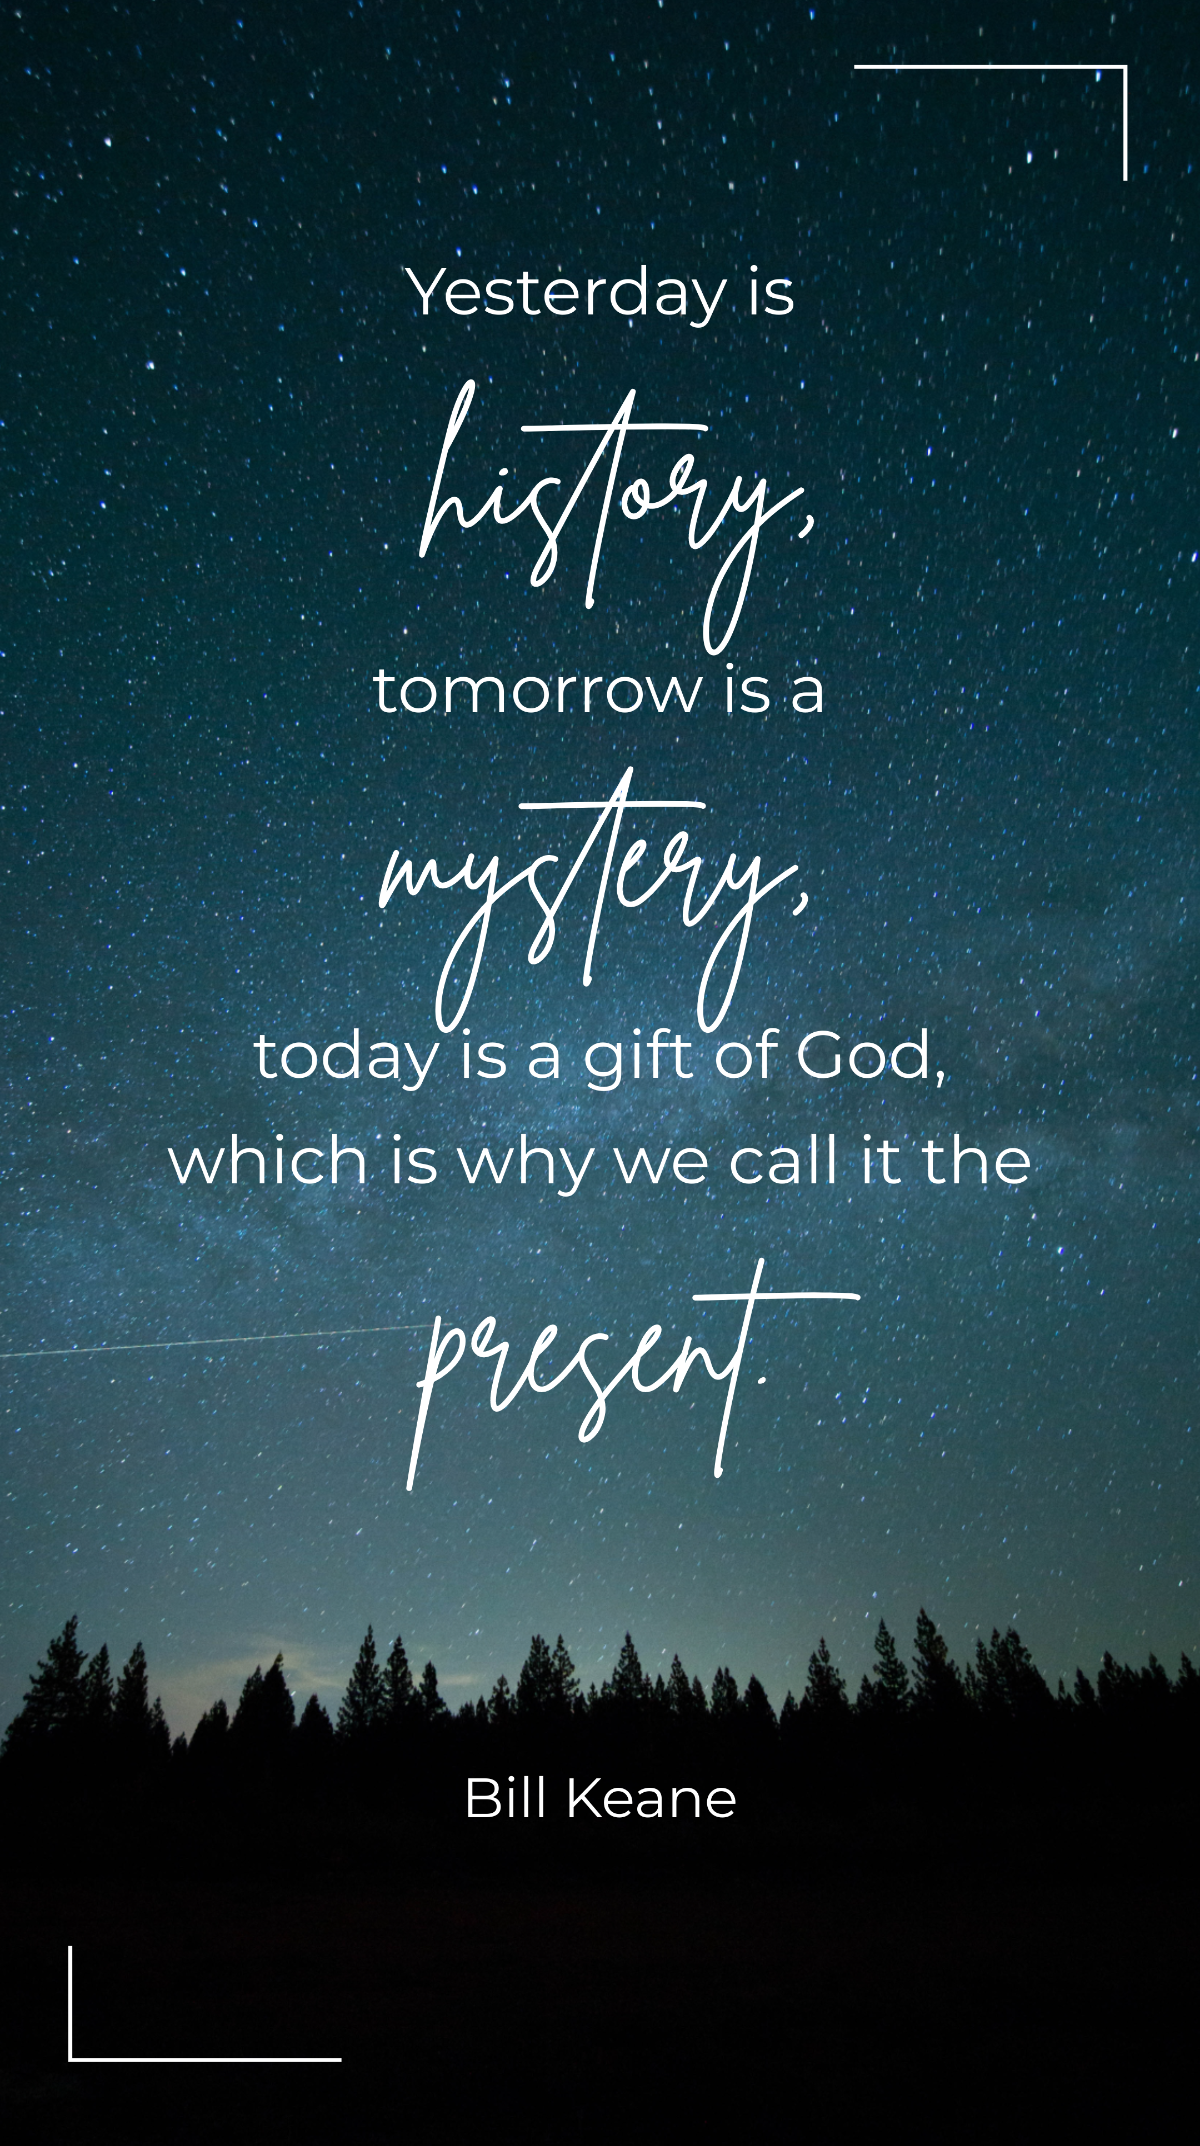 Bill Keane - Yesterday is history, tomorrow is a mystery, today is a gift of God, which is why we call it the present. Template